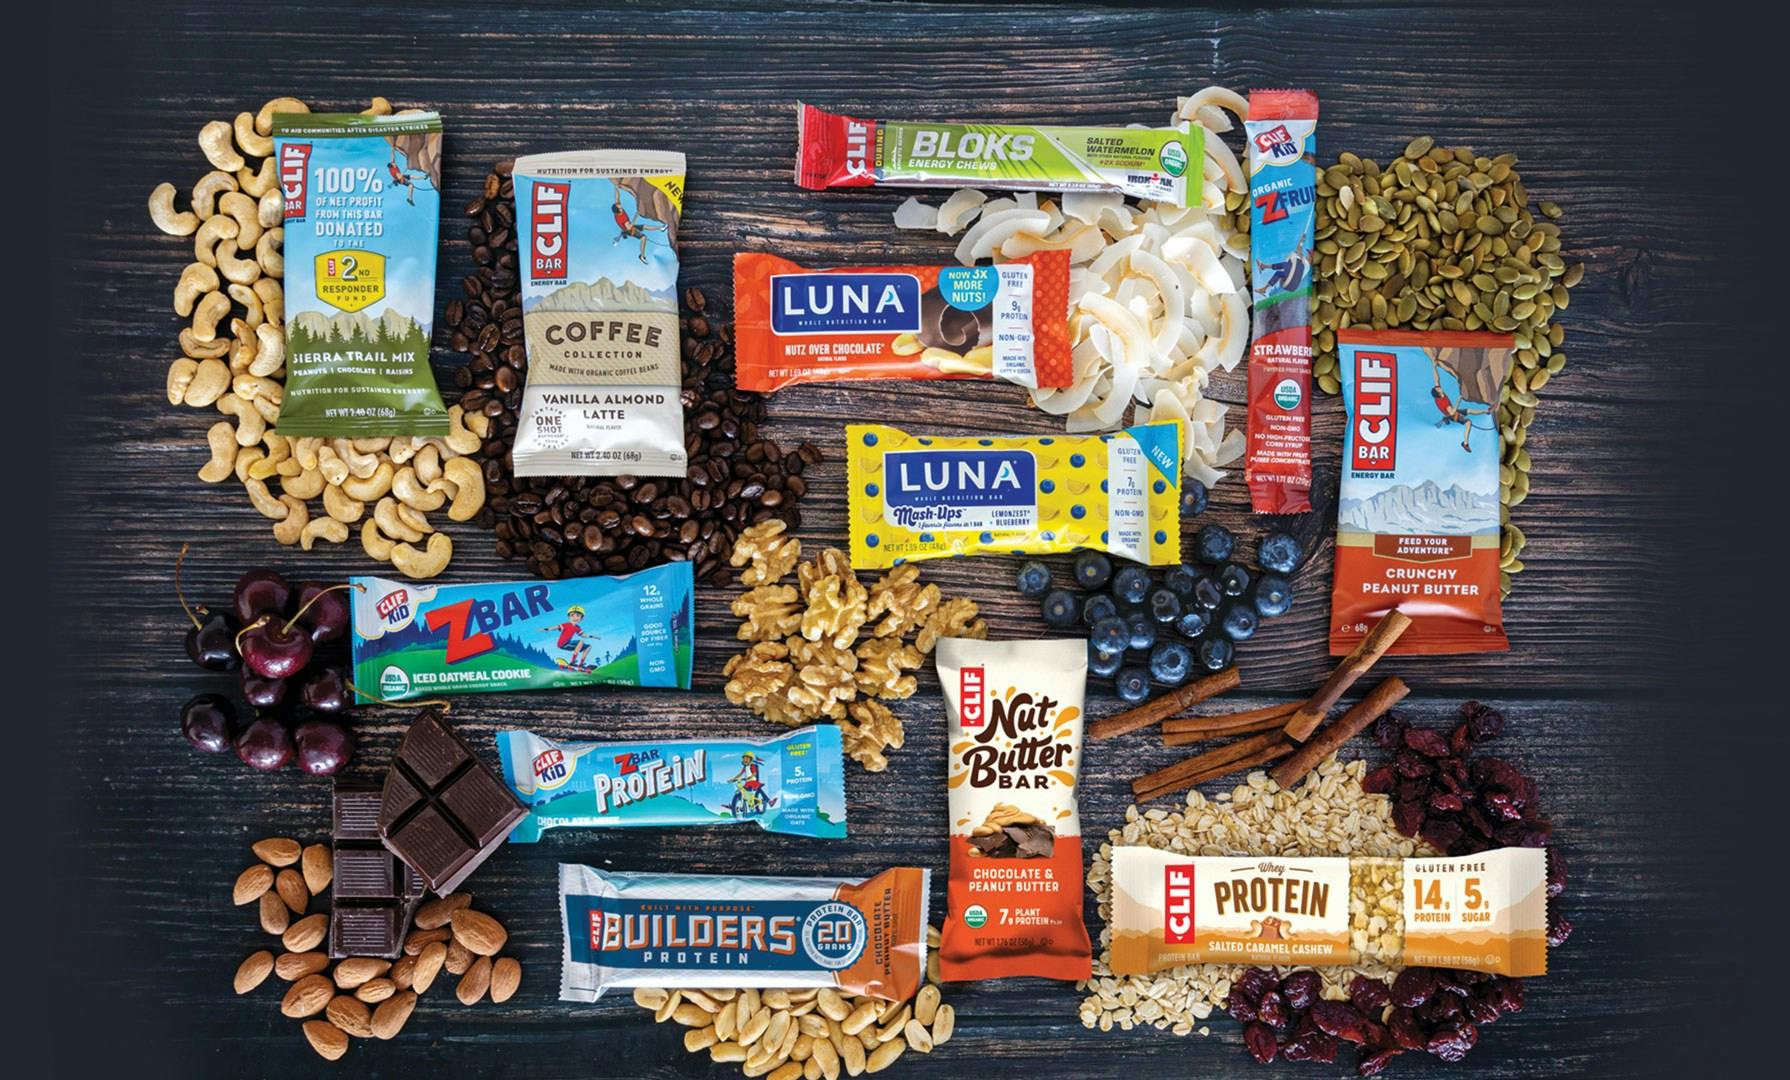 Clif product assortment with ingredients